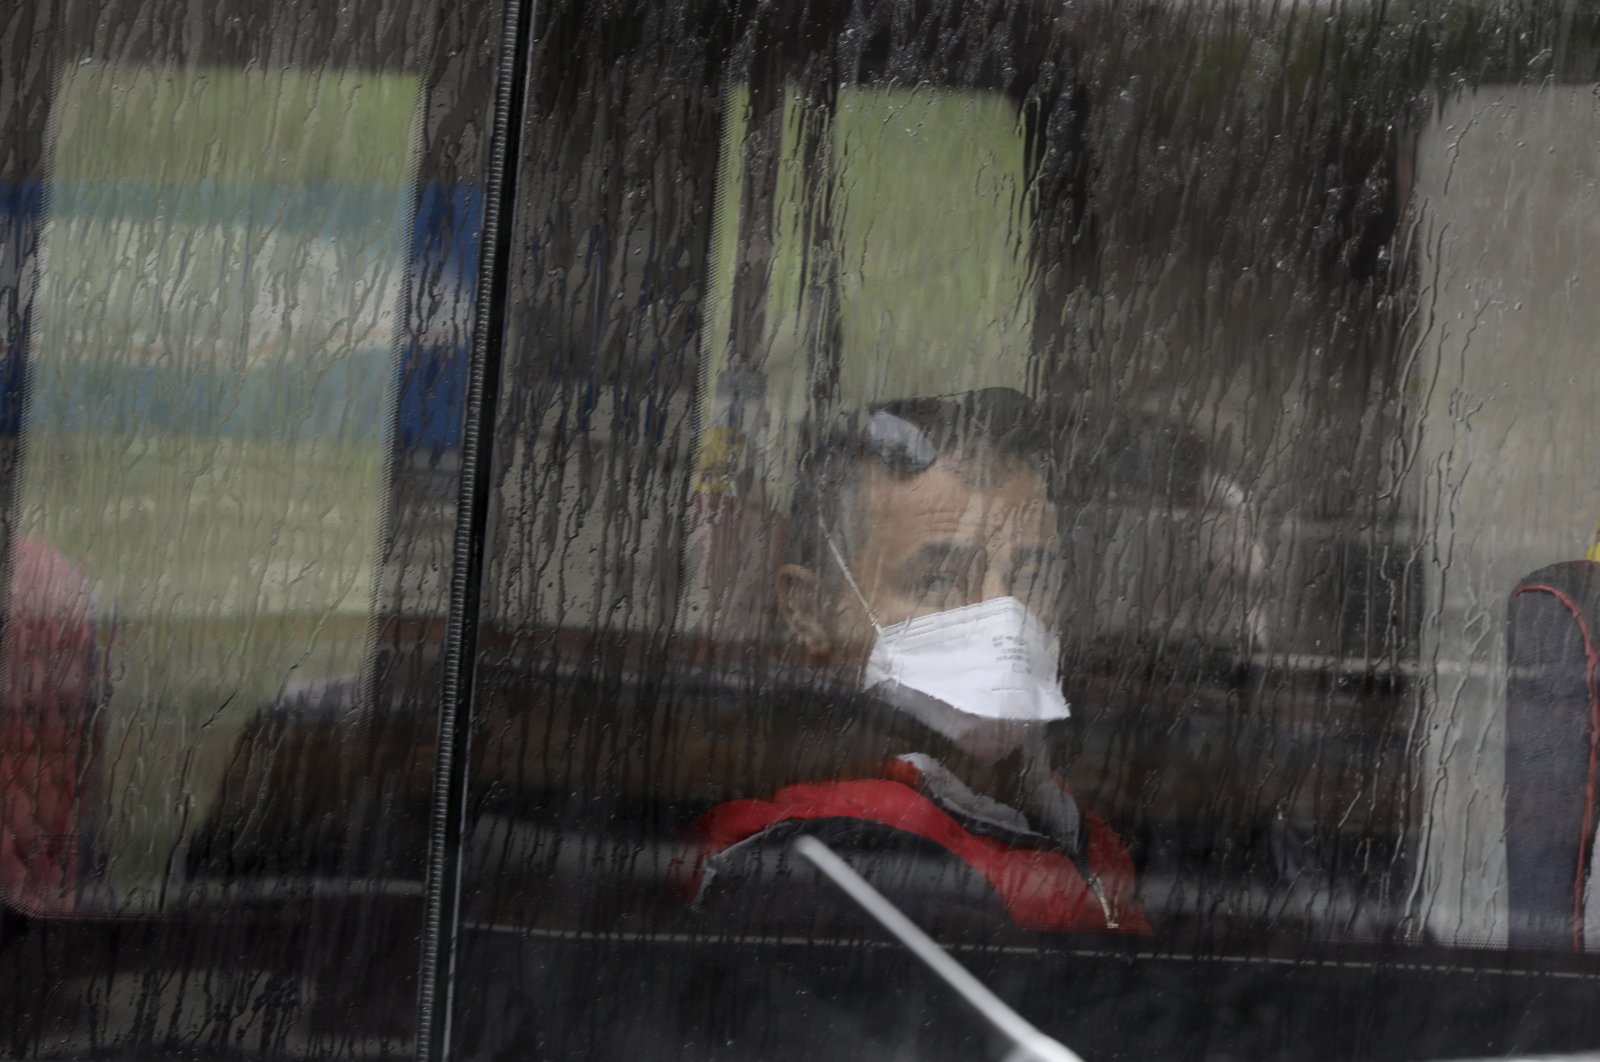 A man wearing a face mask, for protection against the coronavirus, sits on a bus in Ankara, Turkey, Tuesday, May 5, 2020.